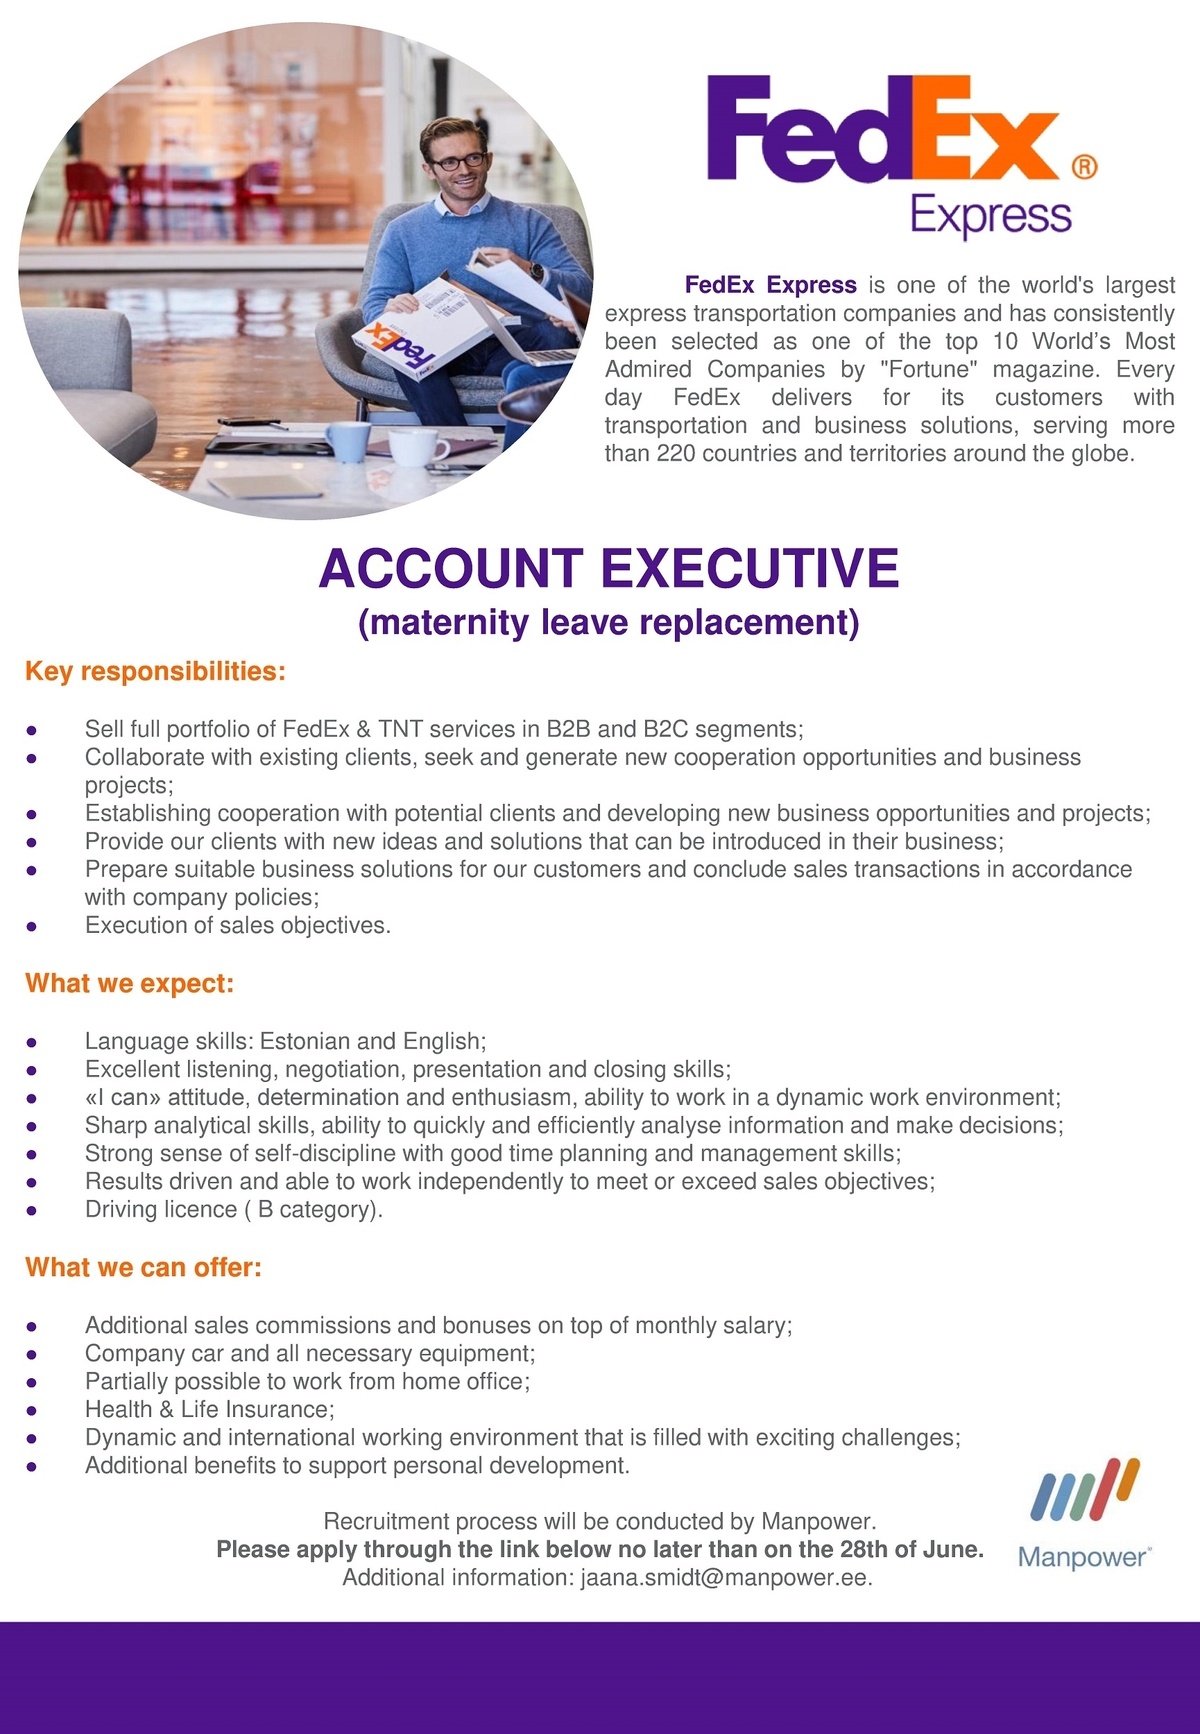 Manpower OÜ Account Executive (maternity leave replacement)